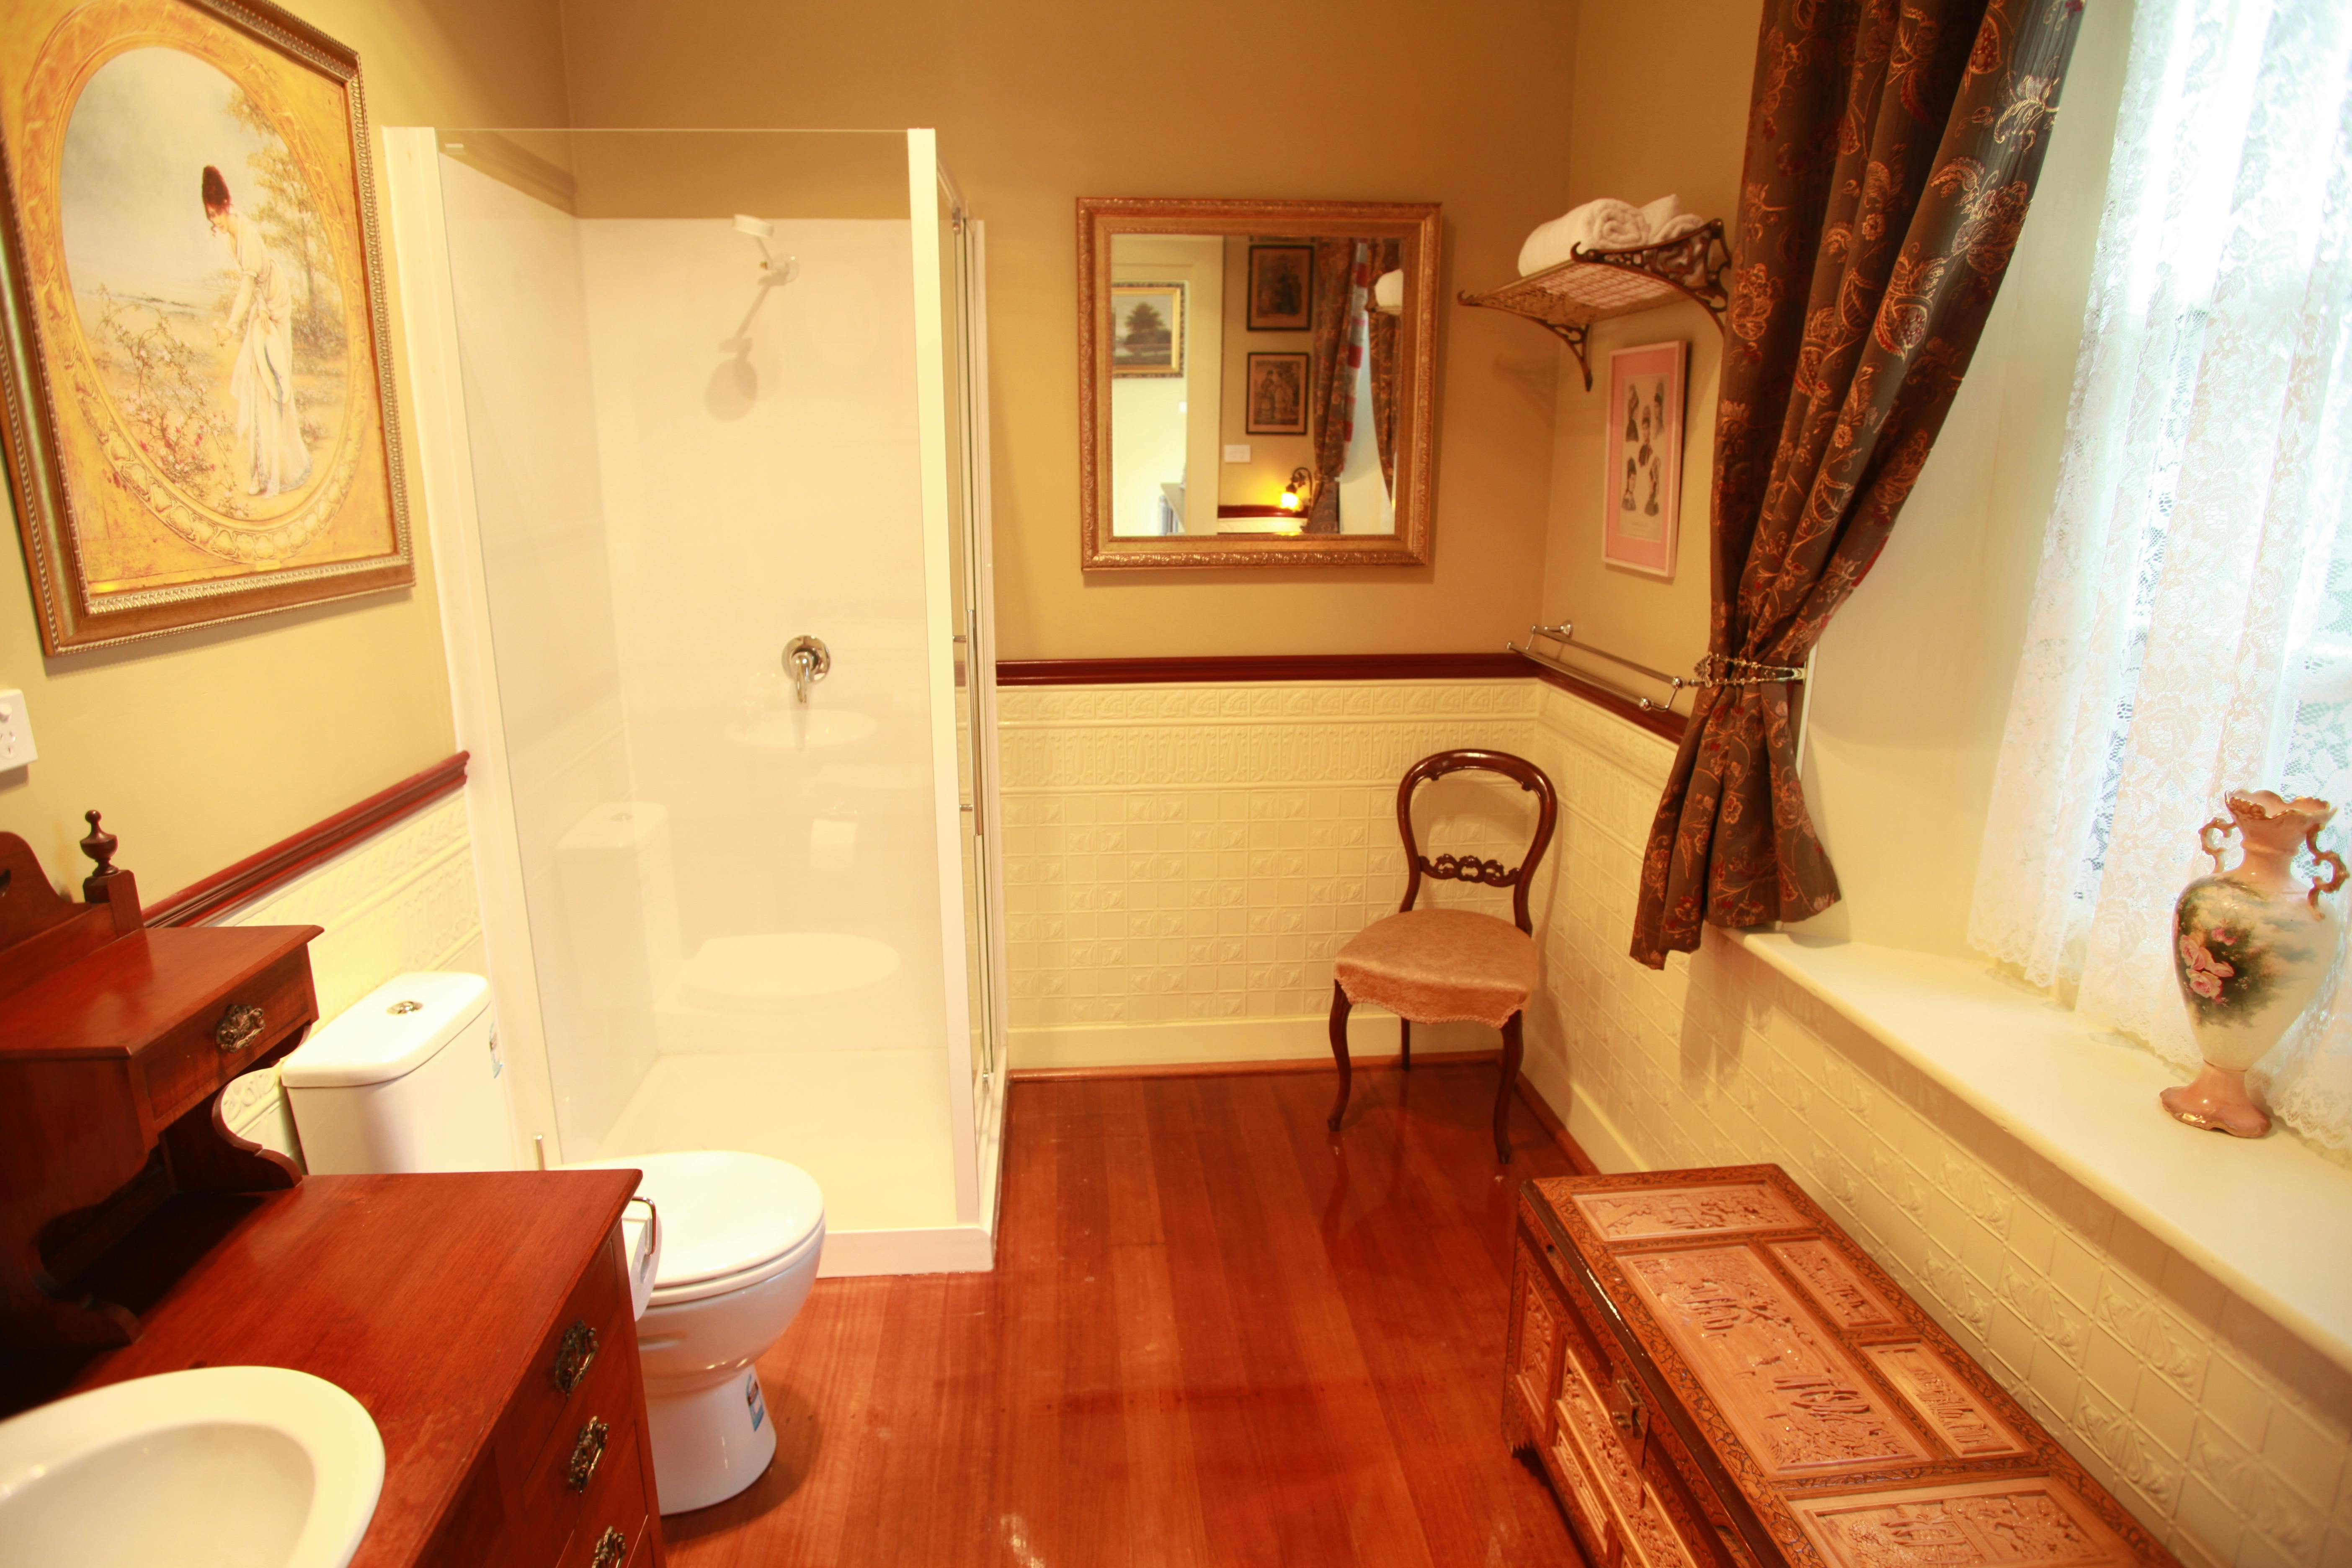 Historic Blakes Manor Heritage Accommodation. Affordable luxury and comfort close to hundreds of Tasmanias attractions